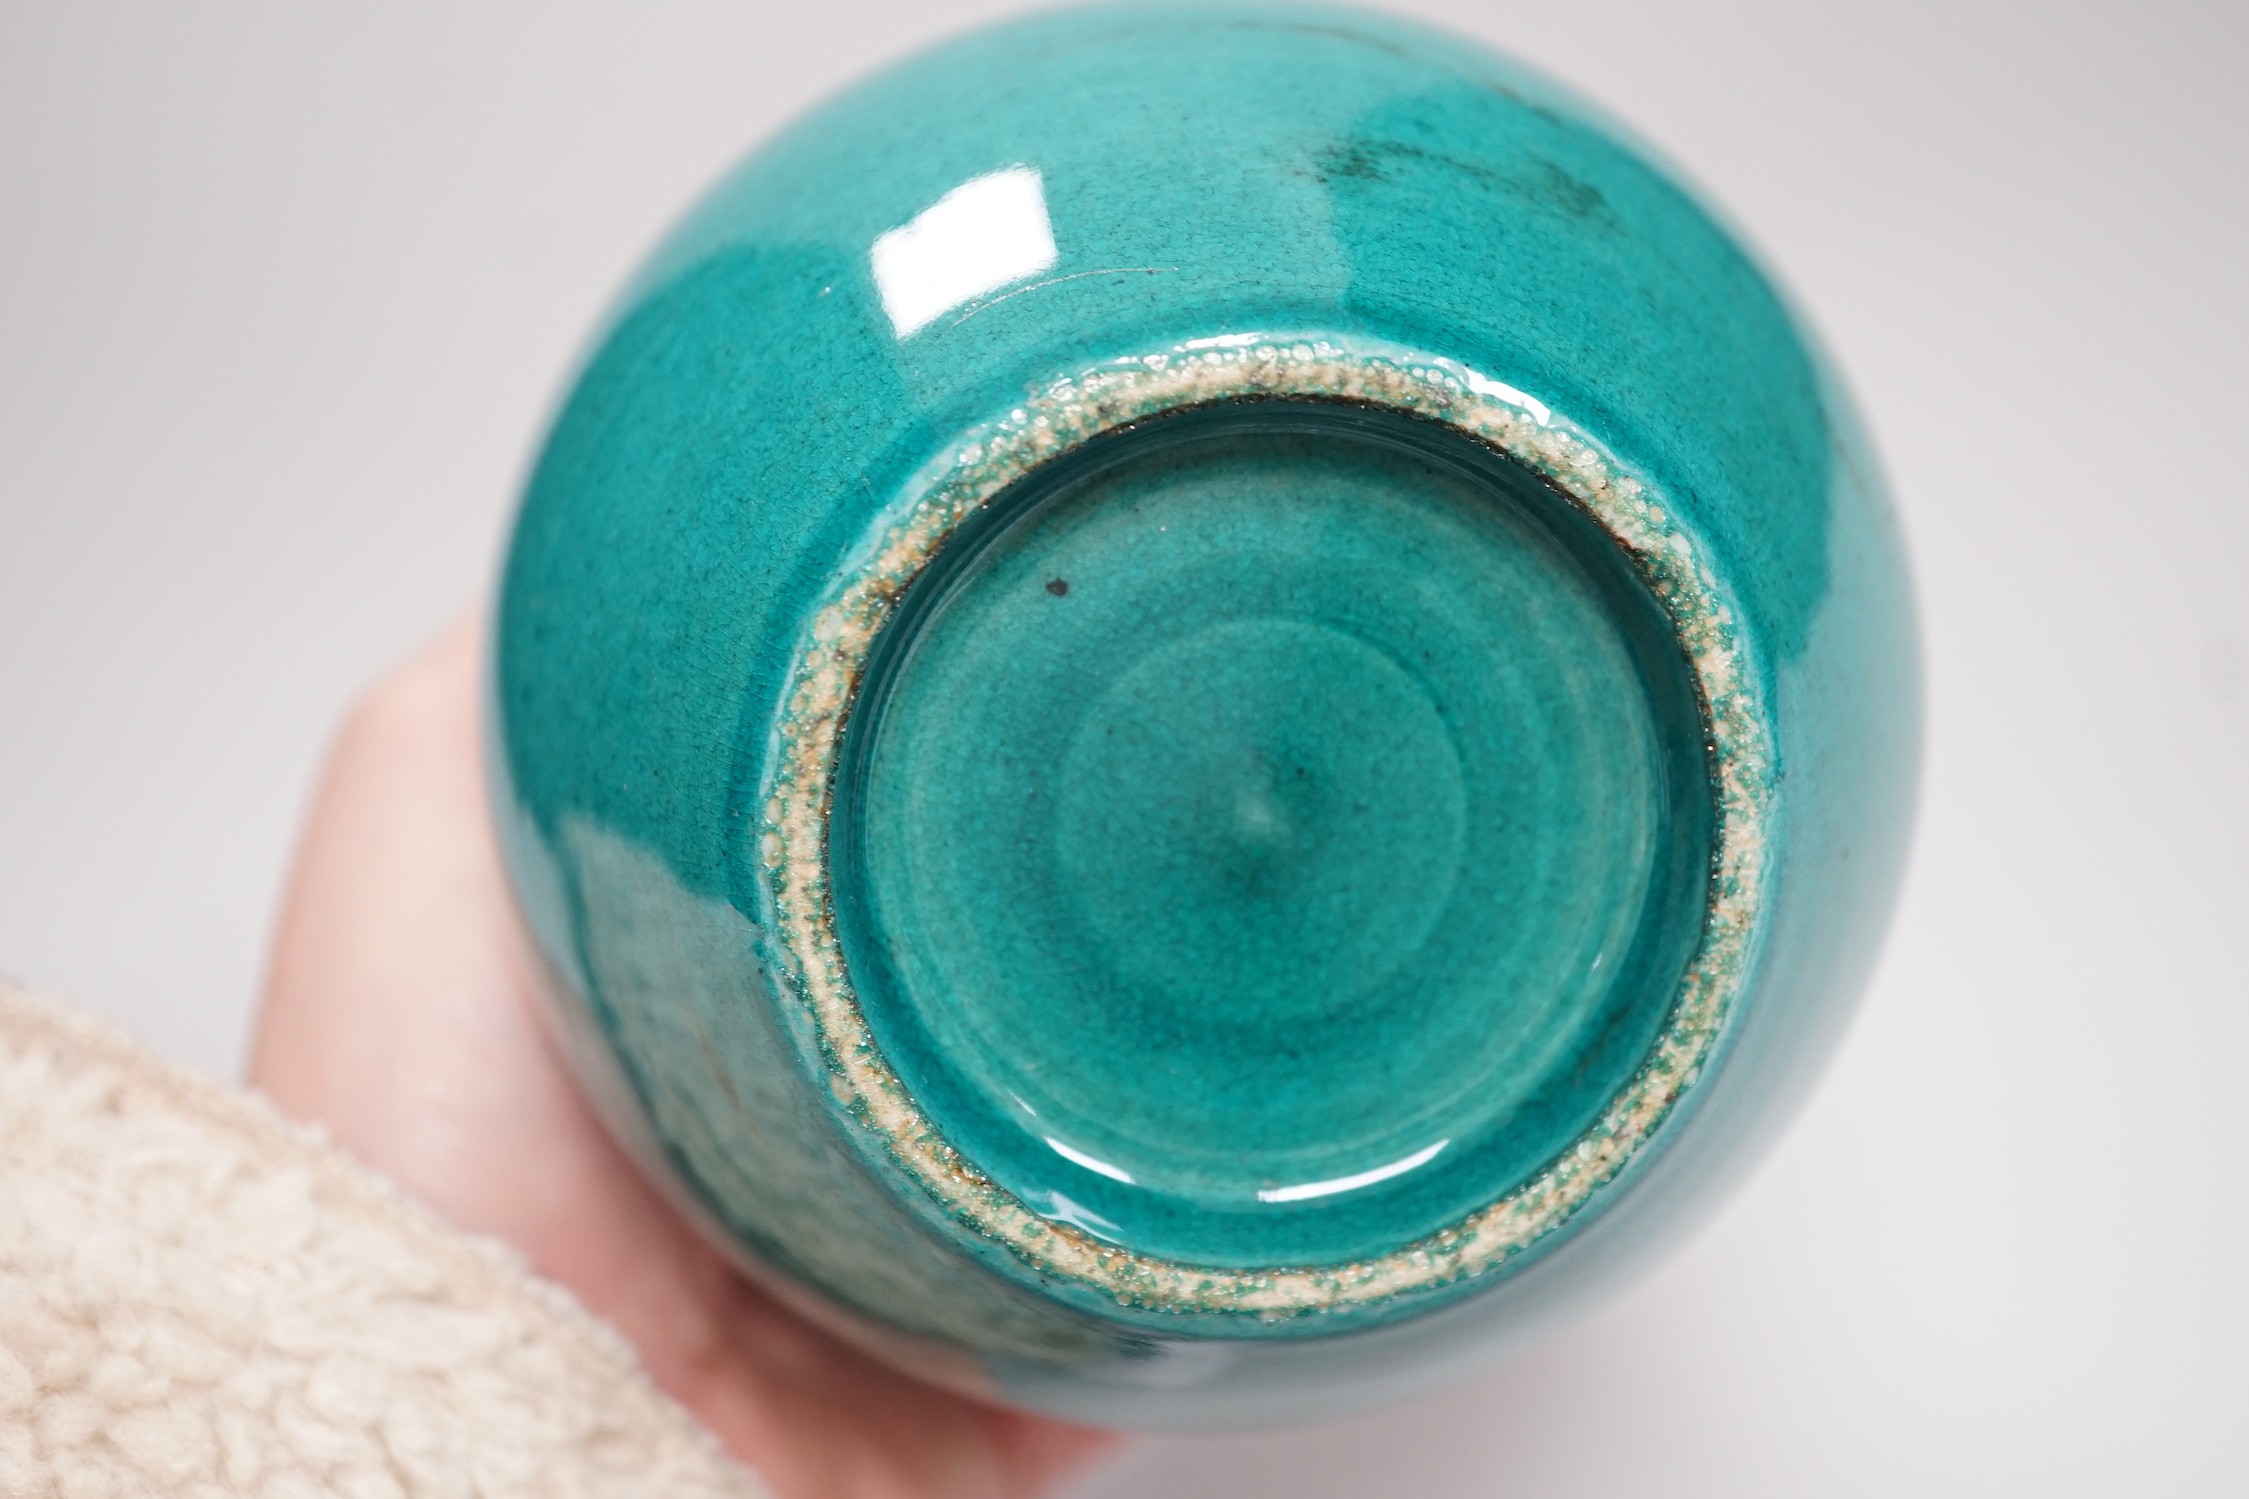 A Chinese turquoise glaze double gourd vase, 17cm